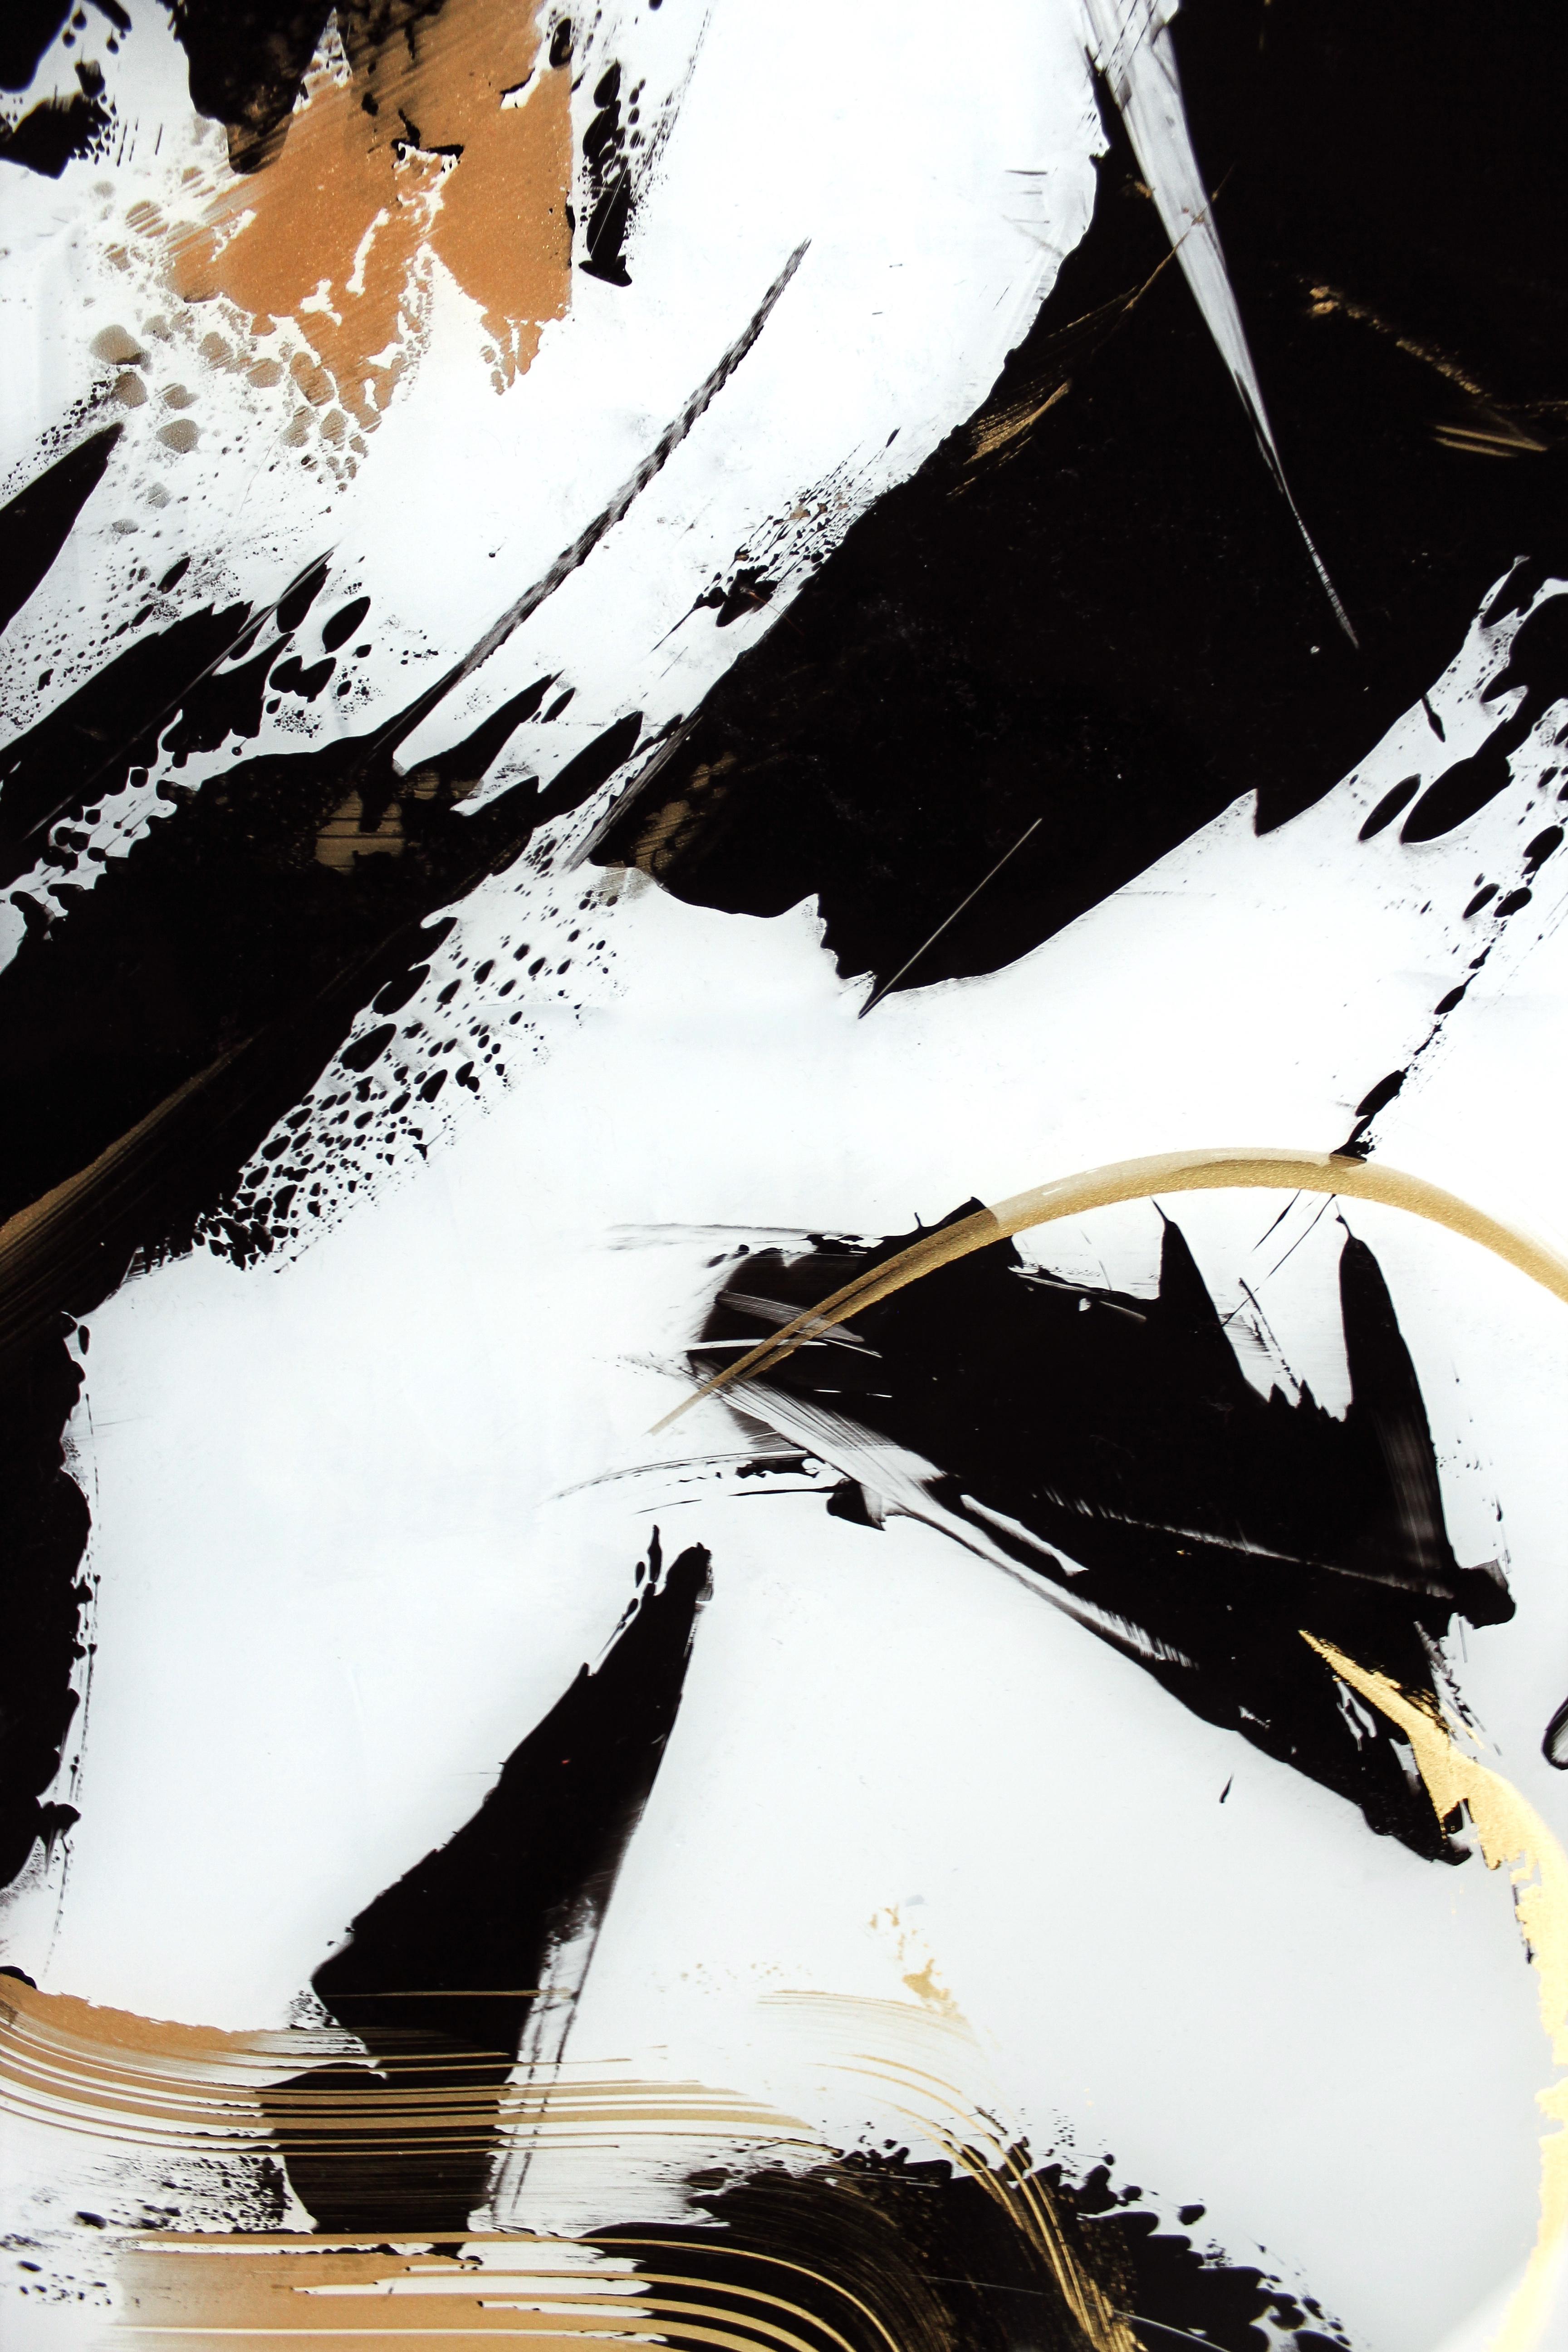 Black white and gold gestural abstract expressionist painting done by contemporary artist Alyson Ocoma. The work is done using acrylic paint and spray paint on acrylic pieces. The work is signed by the artist.

Artist Biography: 
Alyson Ocoma is a